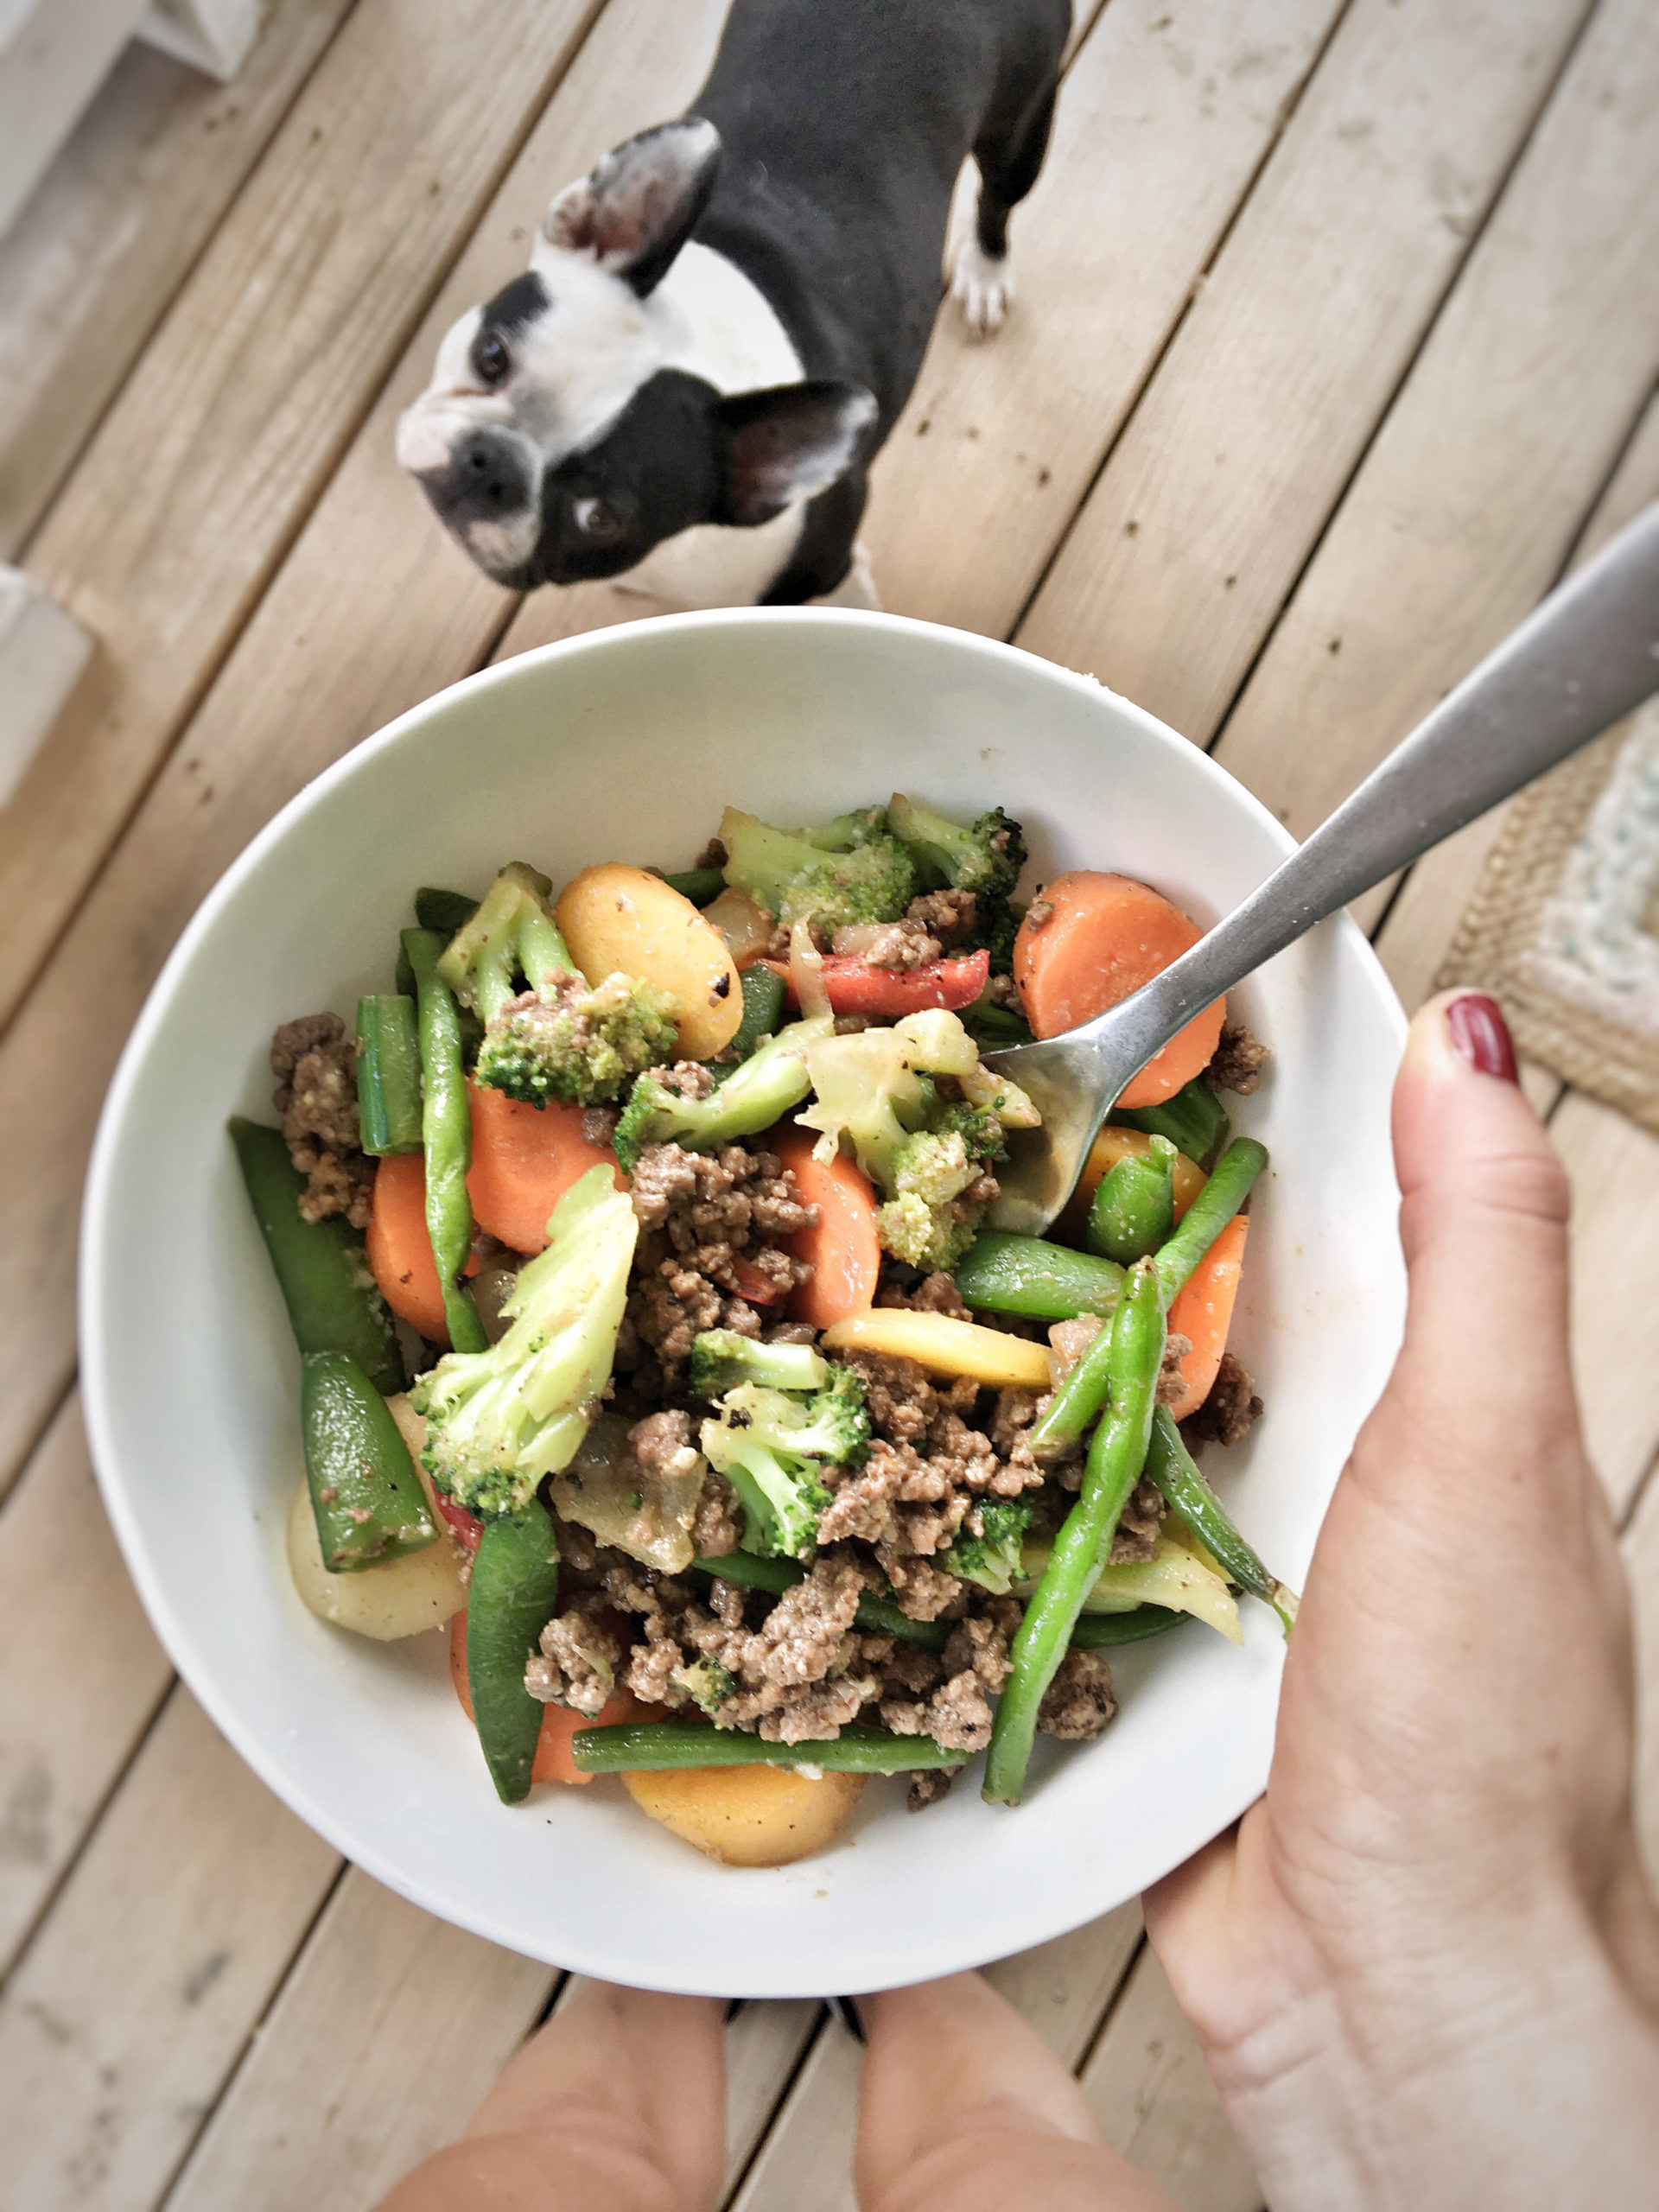 hand holding ground beef stir-fry in bowl